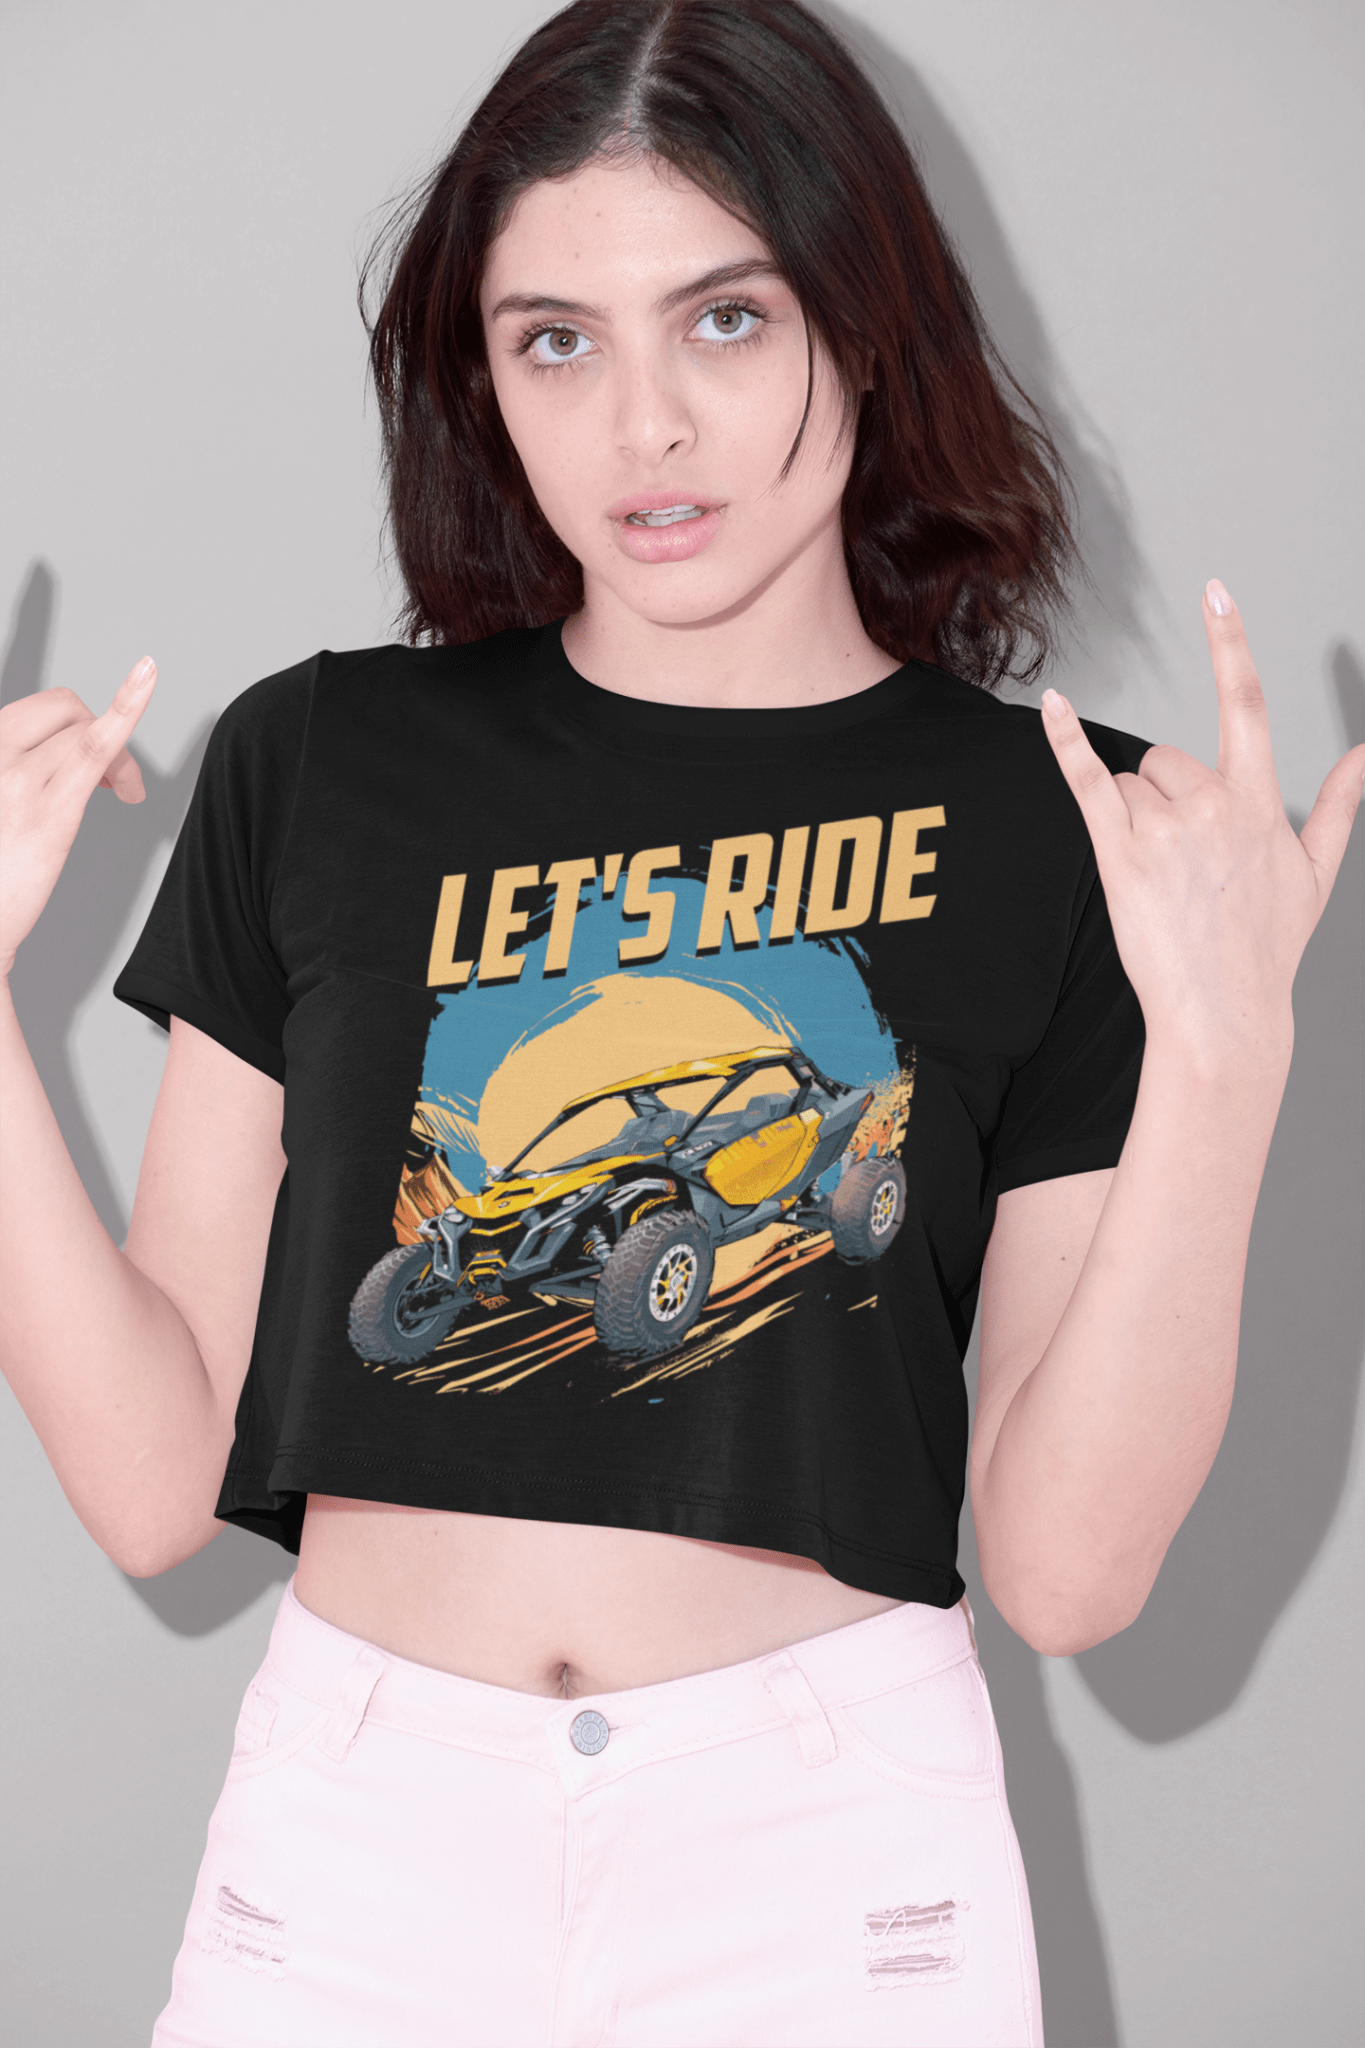 Women's Side-by-Side Offroad Crop Top-Let's Ride - Goats Trail Off-Road Apparel Company